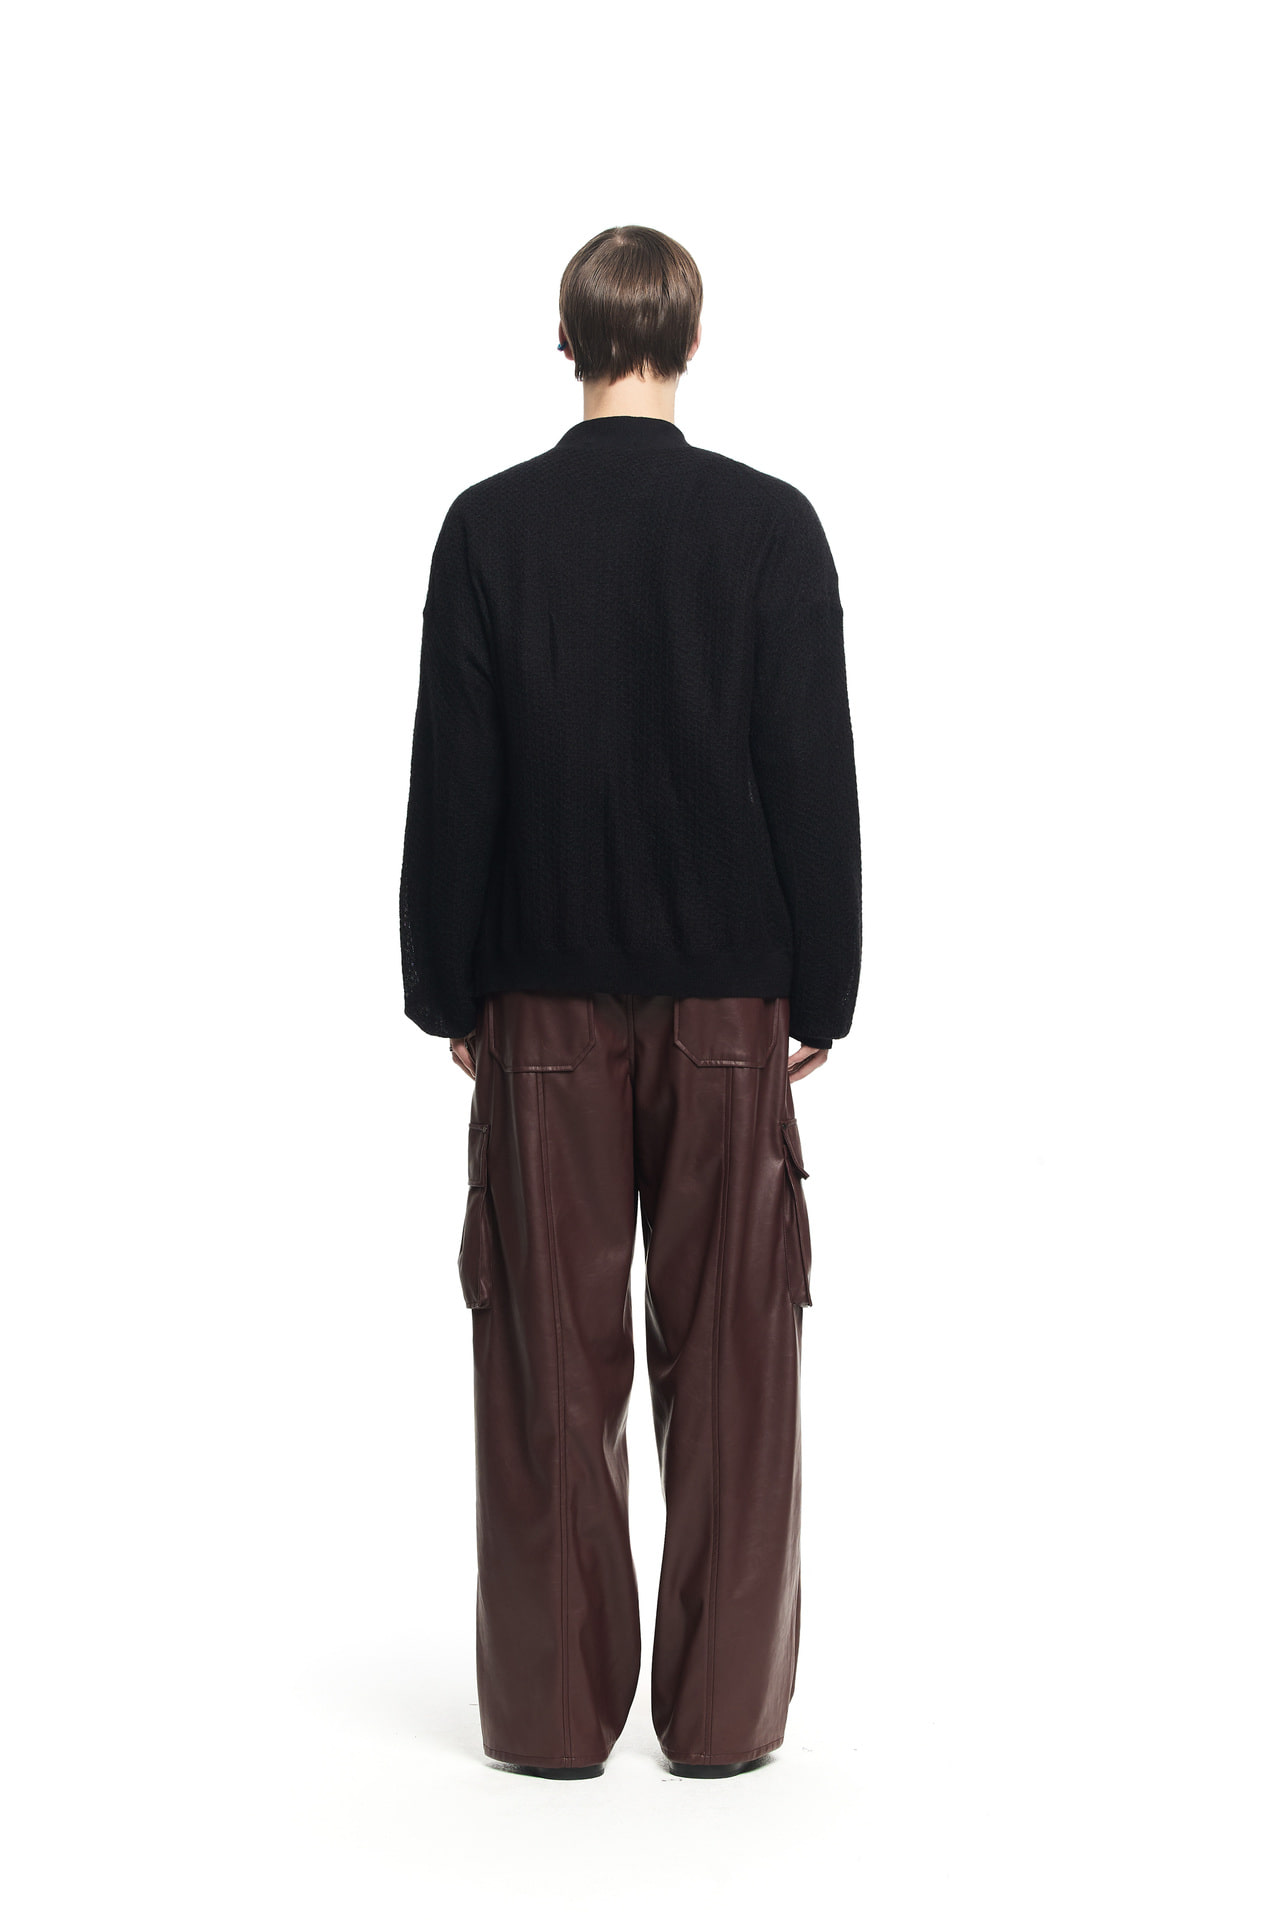 LEATHER OUT CARPENTER WIDE PANTS RED메종미네드 MAISON MINED 메종미네드